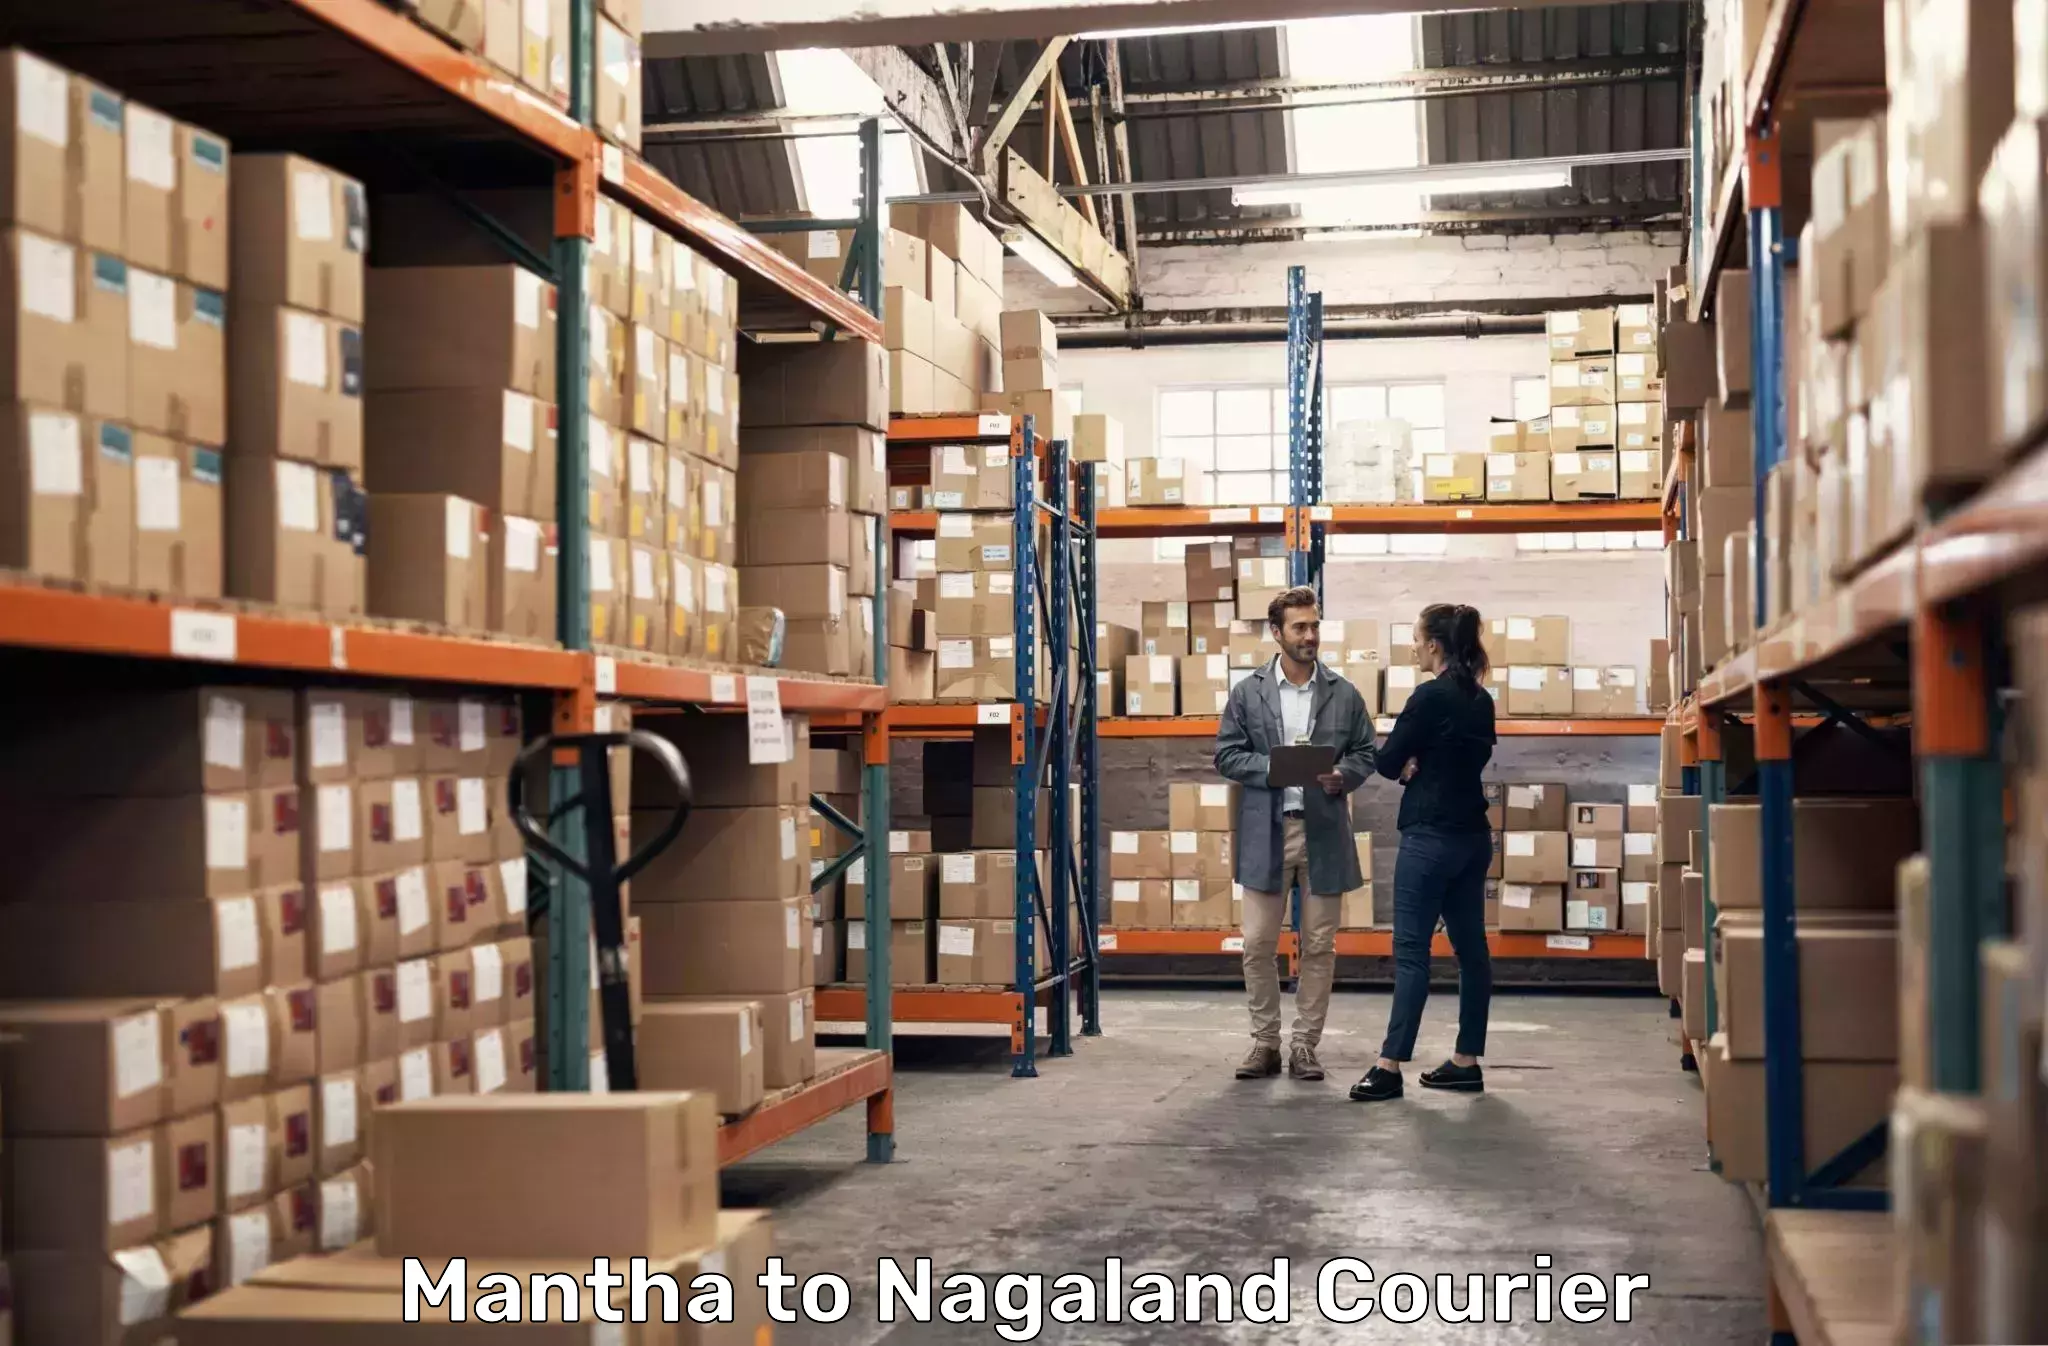 Global courier networks Mantha to NIT Nagaland